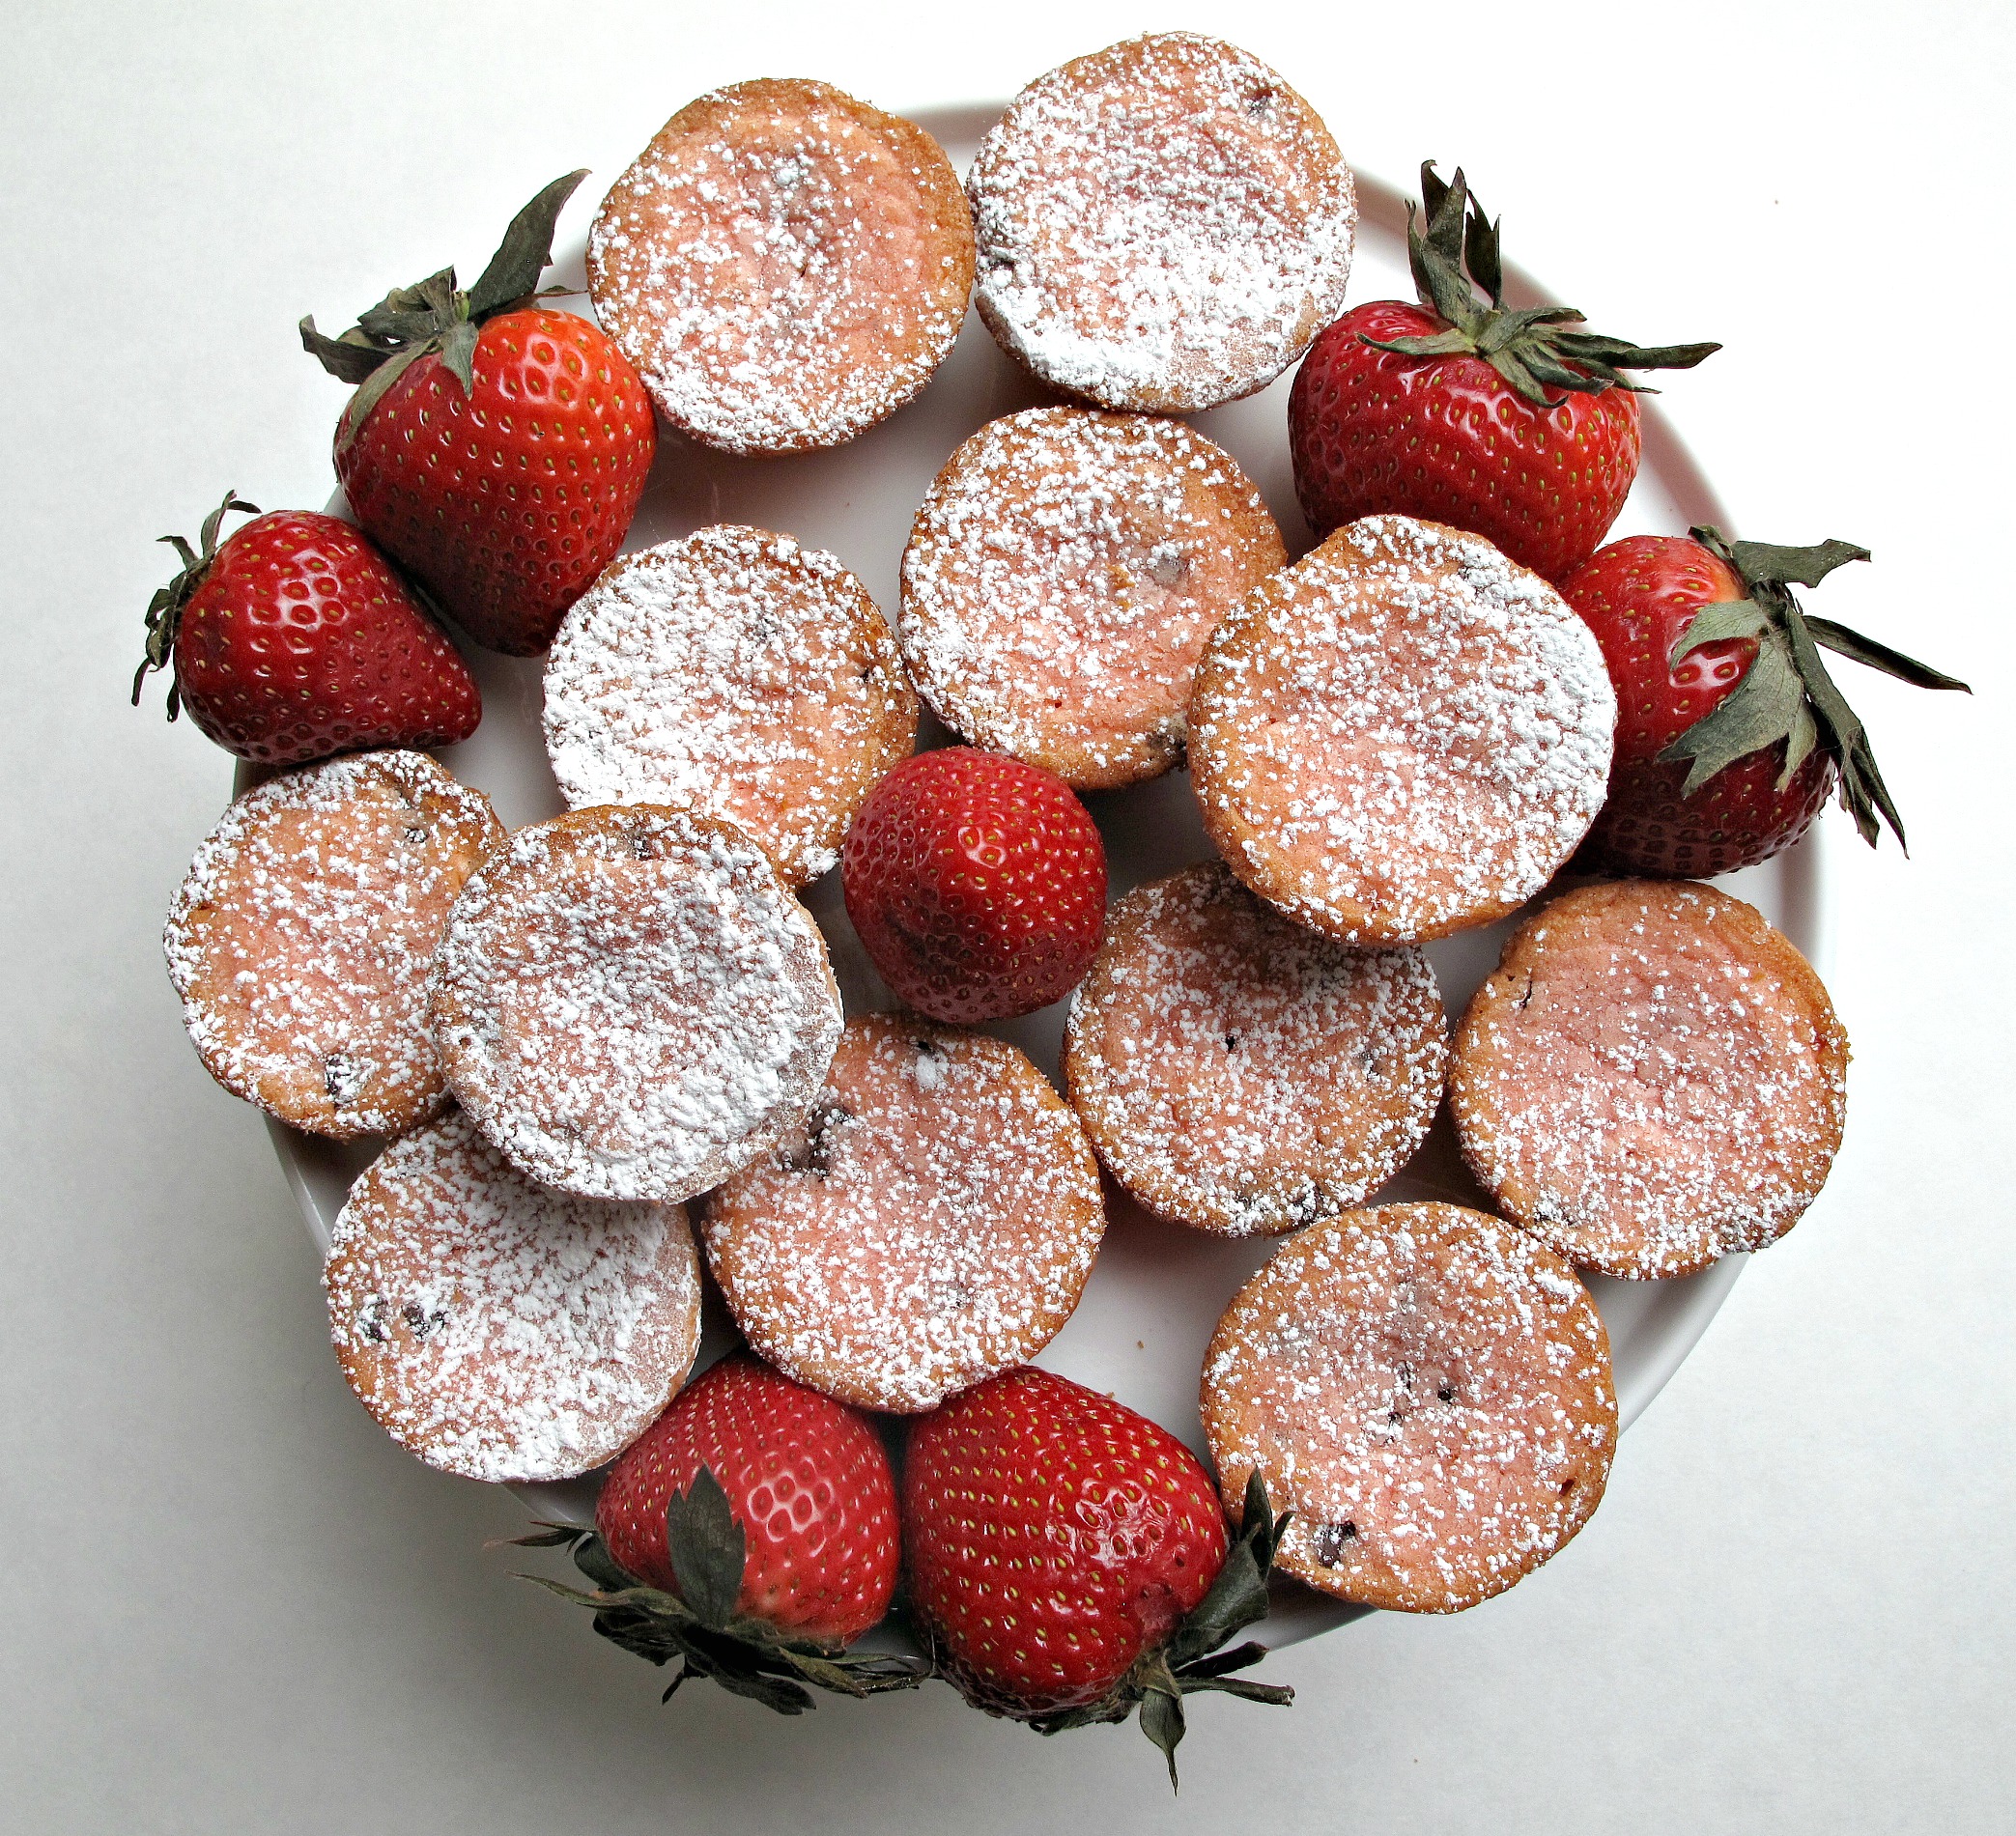 Blondie Bites topped with powdered sugar with large red strawberries on a round platter.